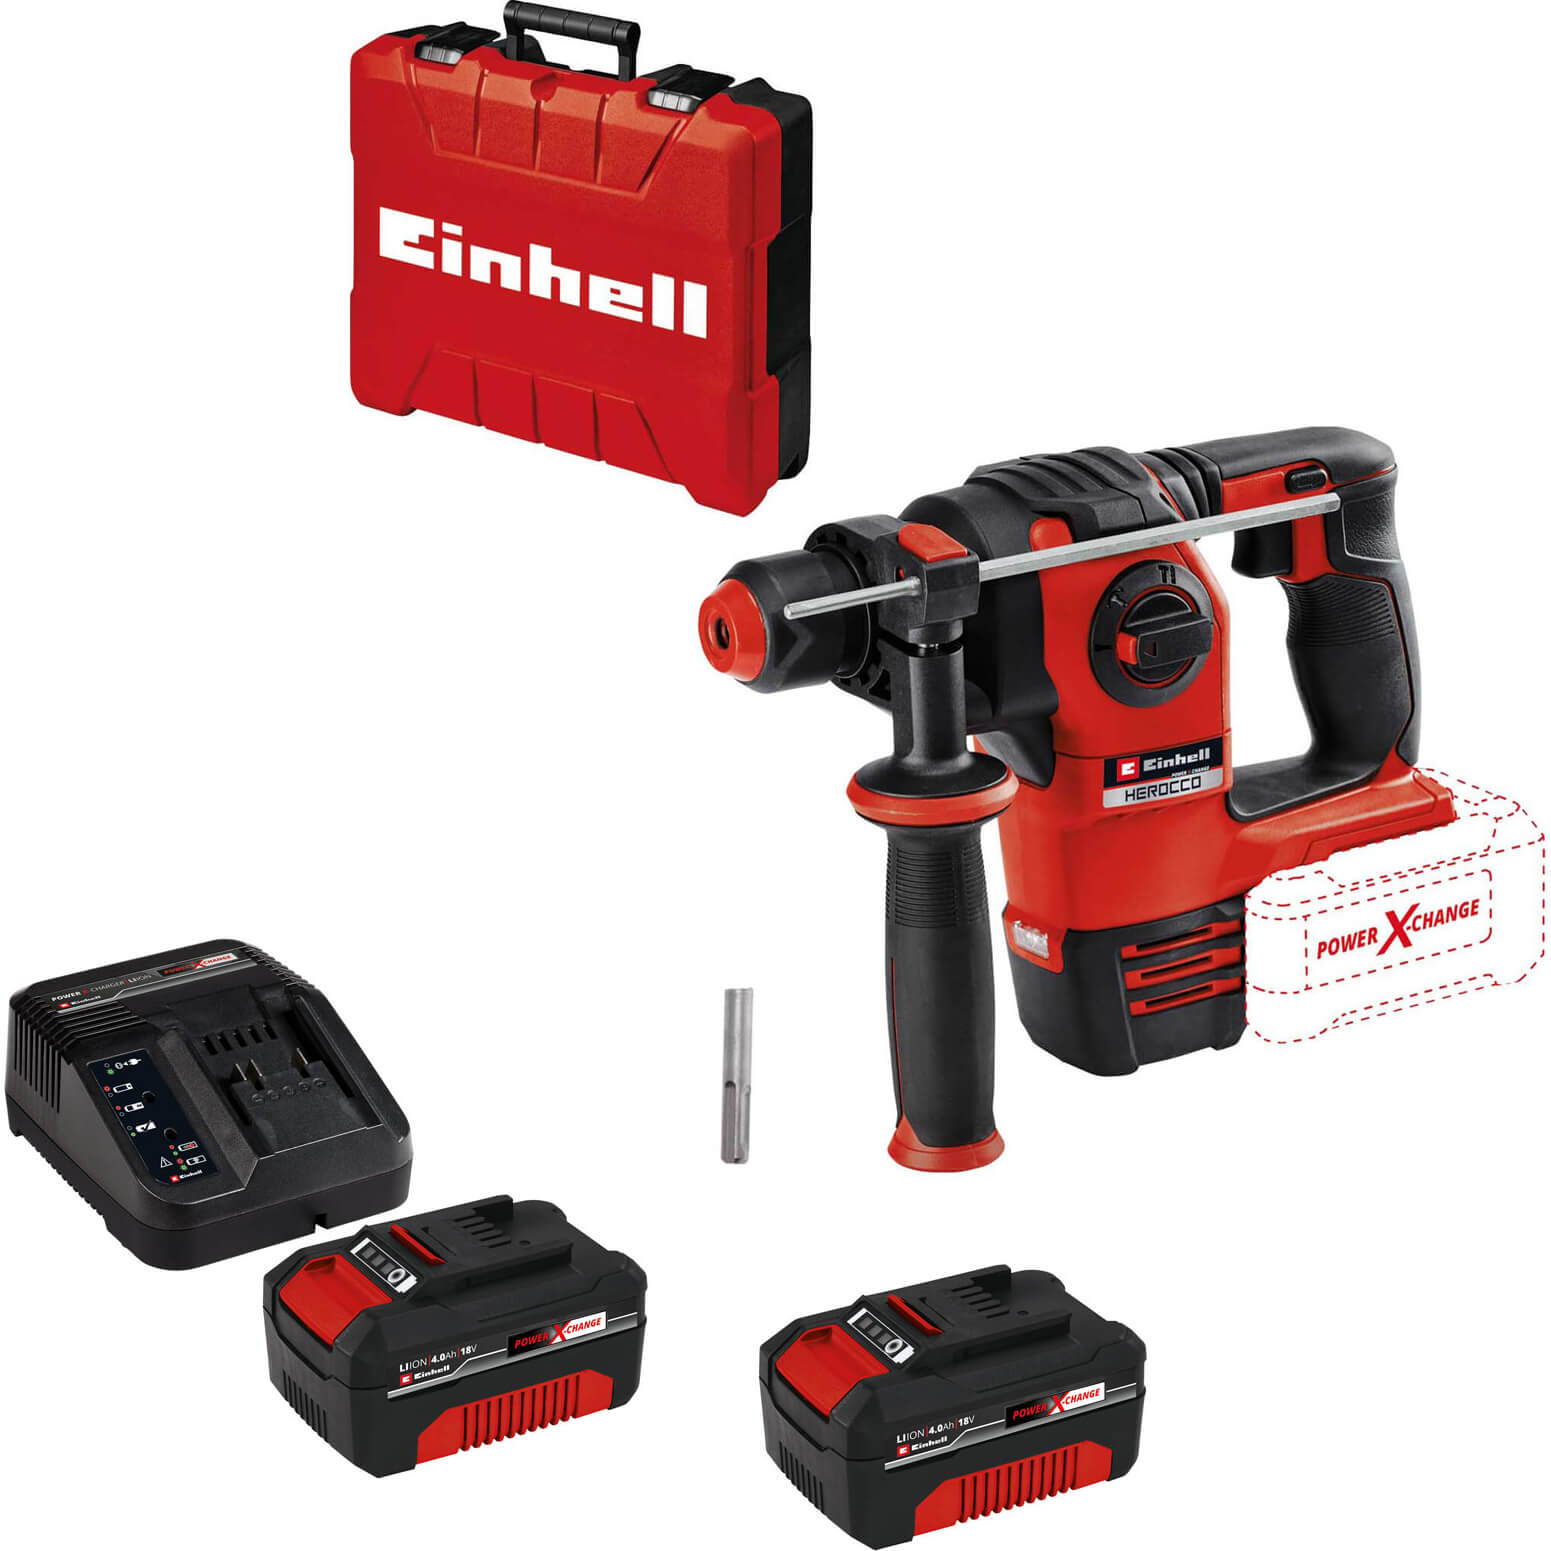 Image of Einhell HEROCCO 18v Cordless Brushless SDS Plus Rotary Hammer Drill 2 x 4ah Li-ion Charger Case